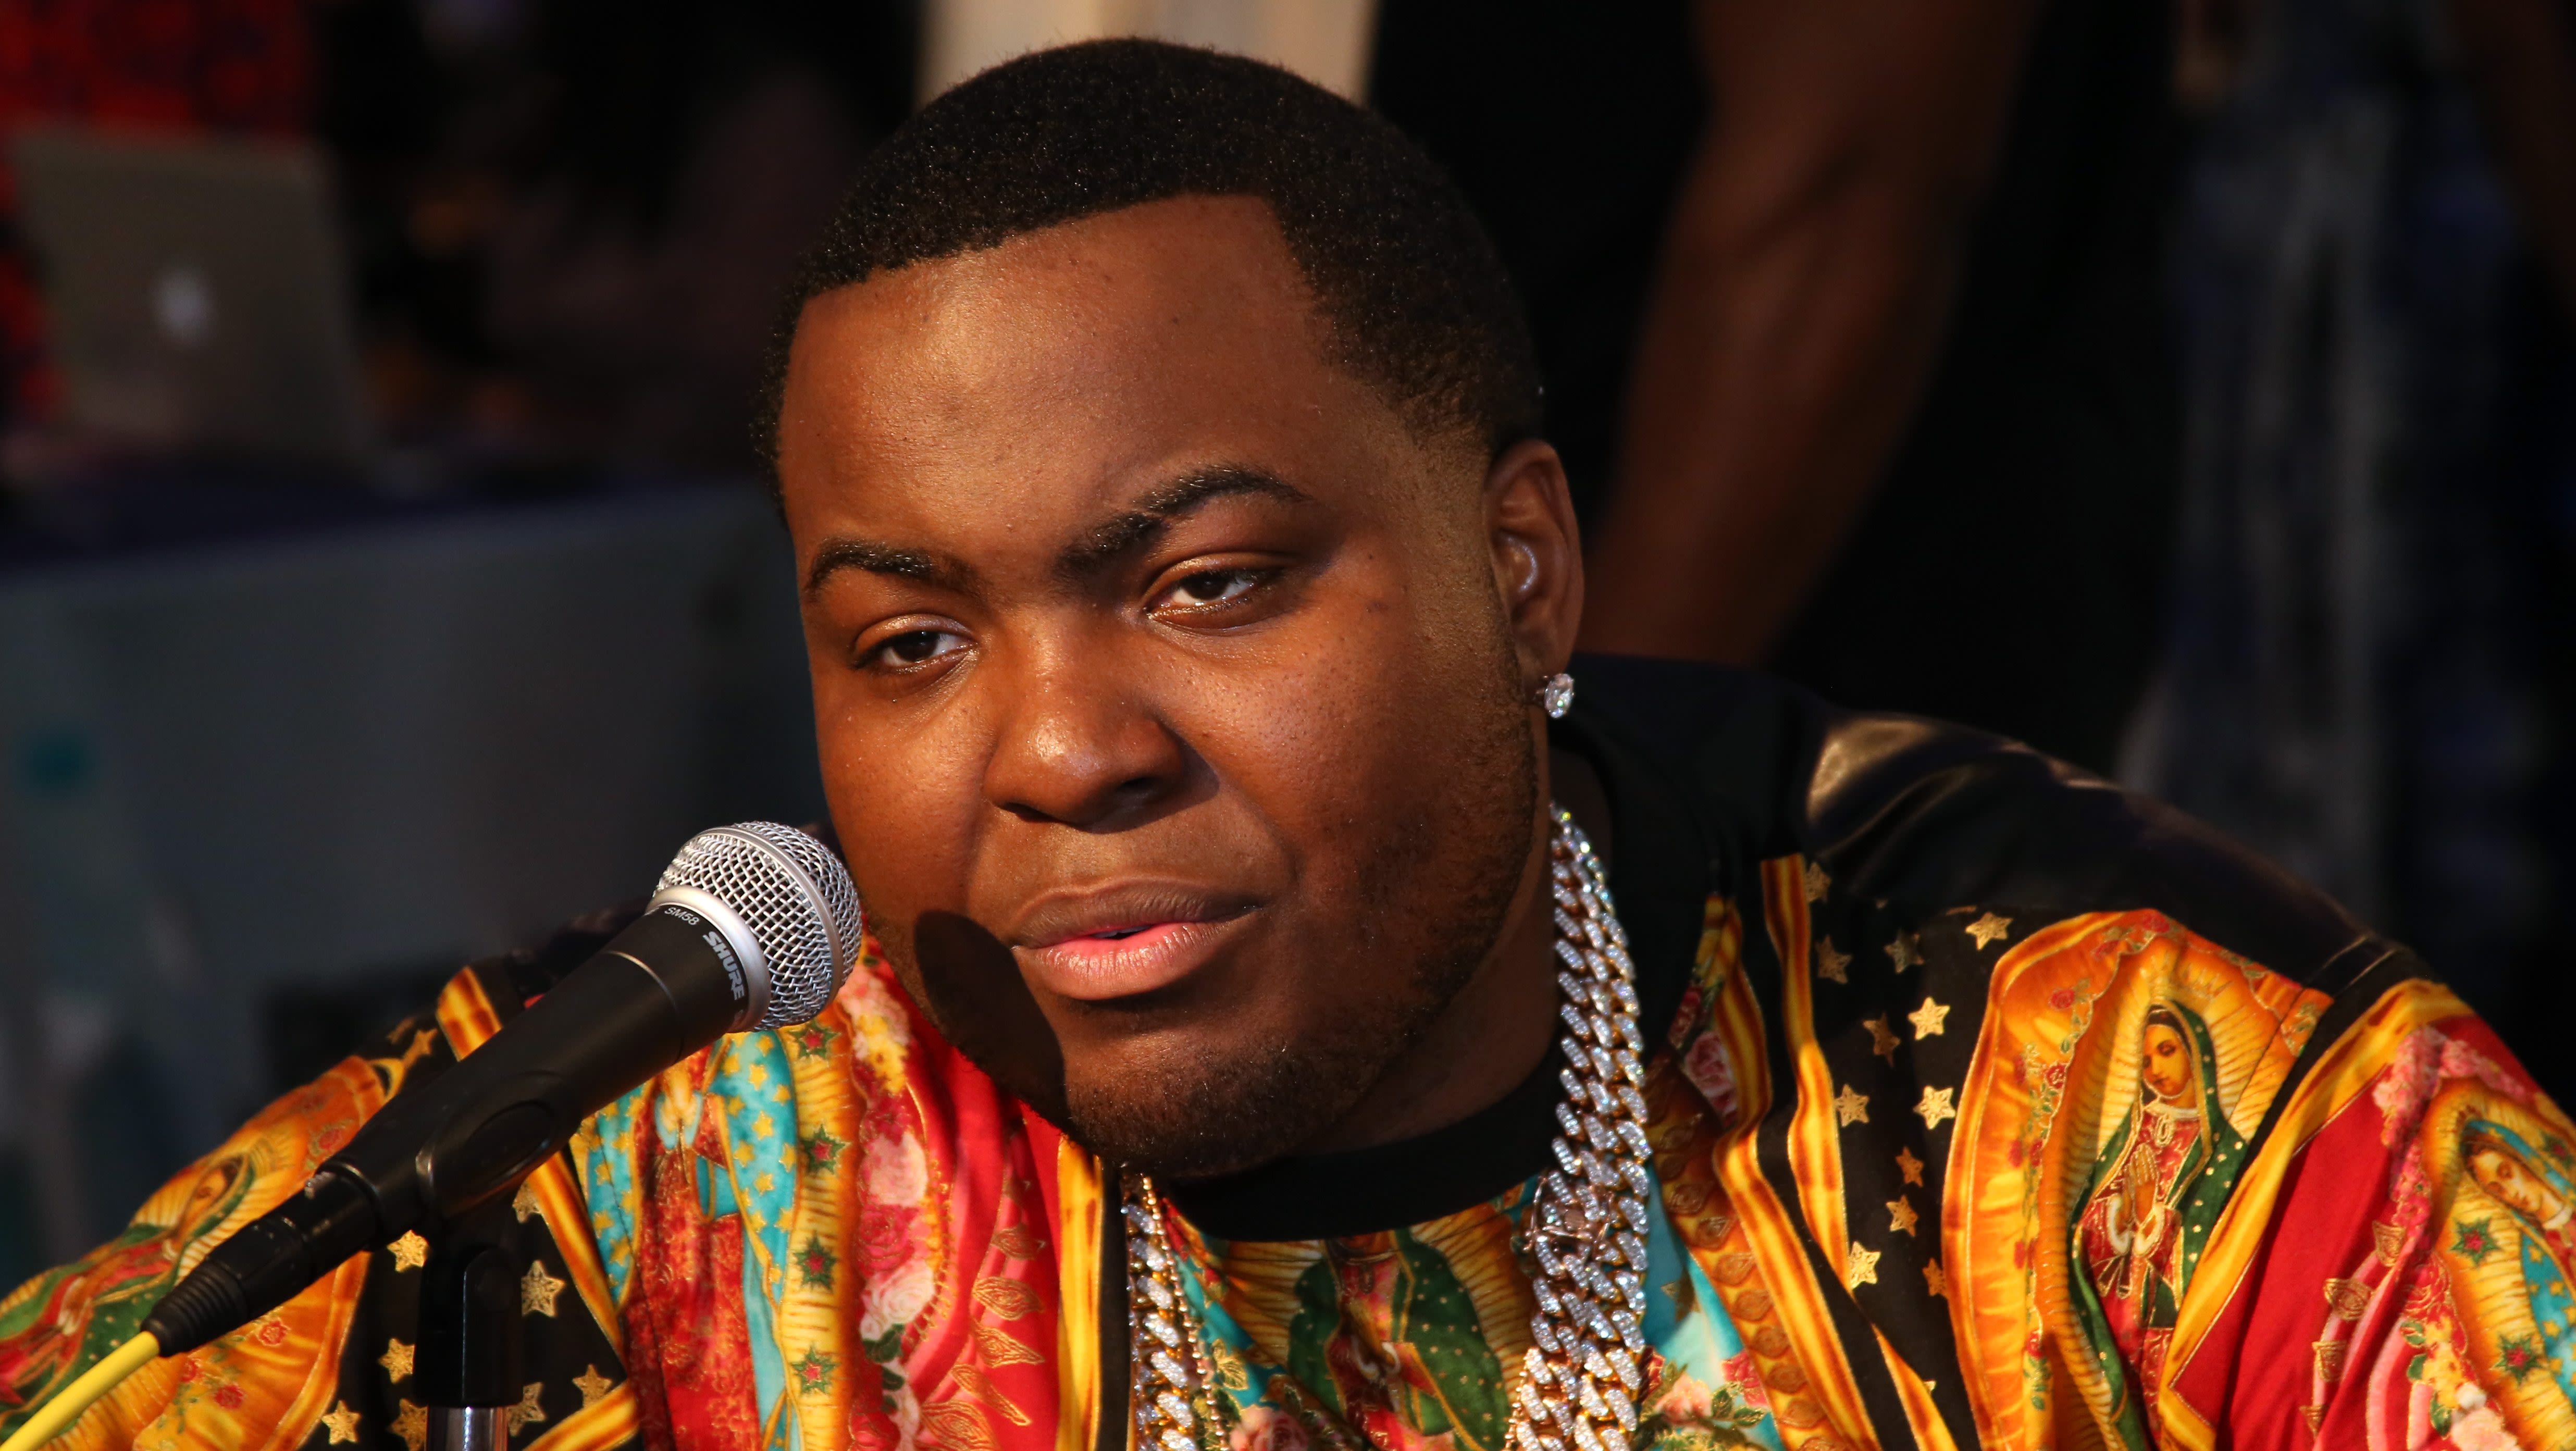 Sean Kingston Facing Decades in Prison Following Indictment Over Wire Fraud Charges